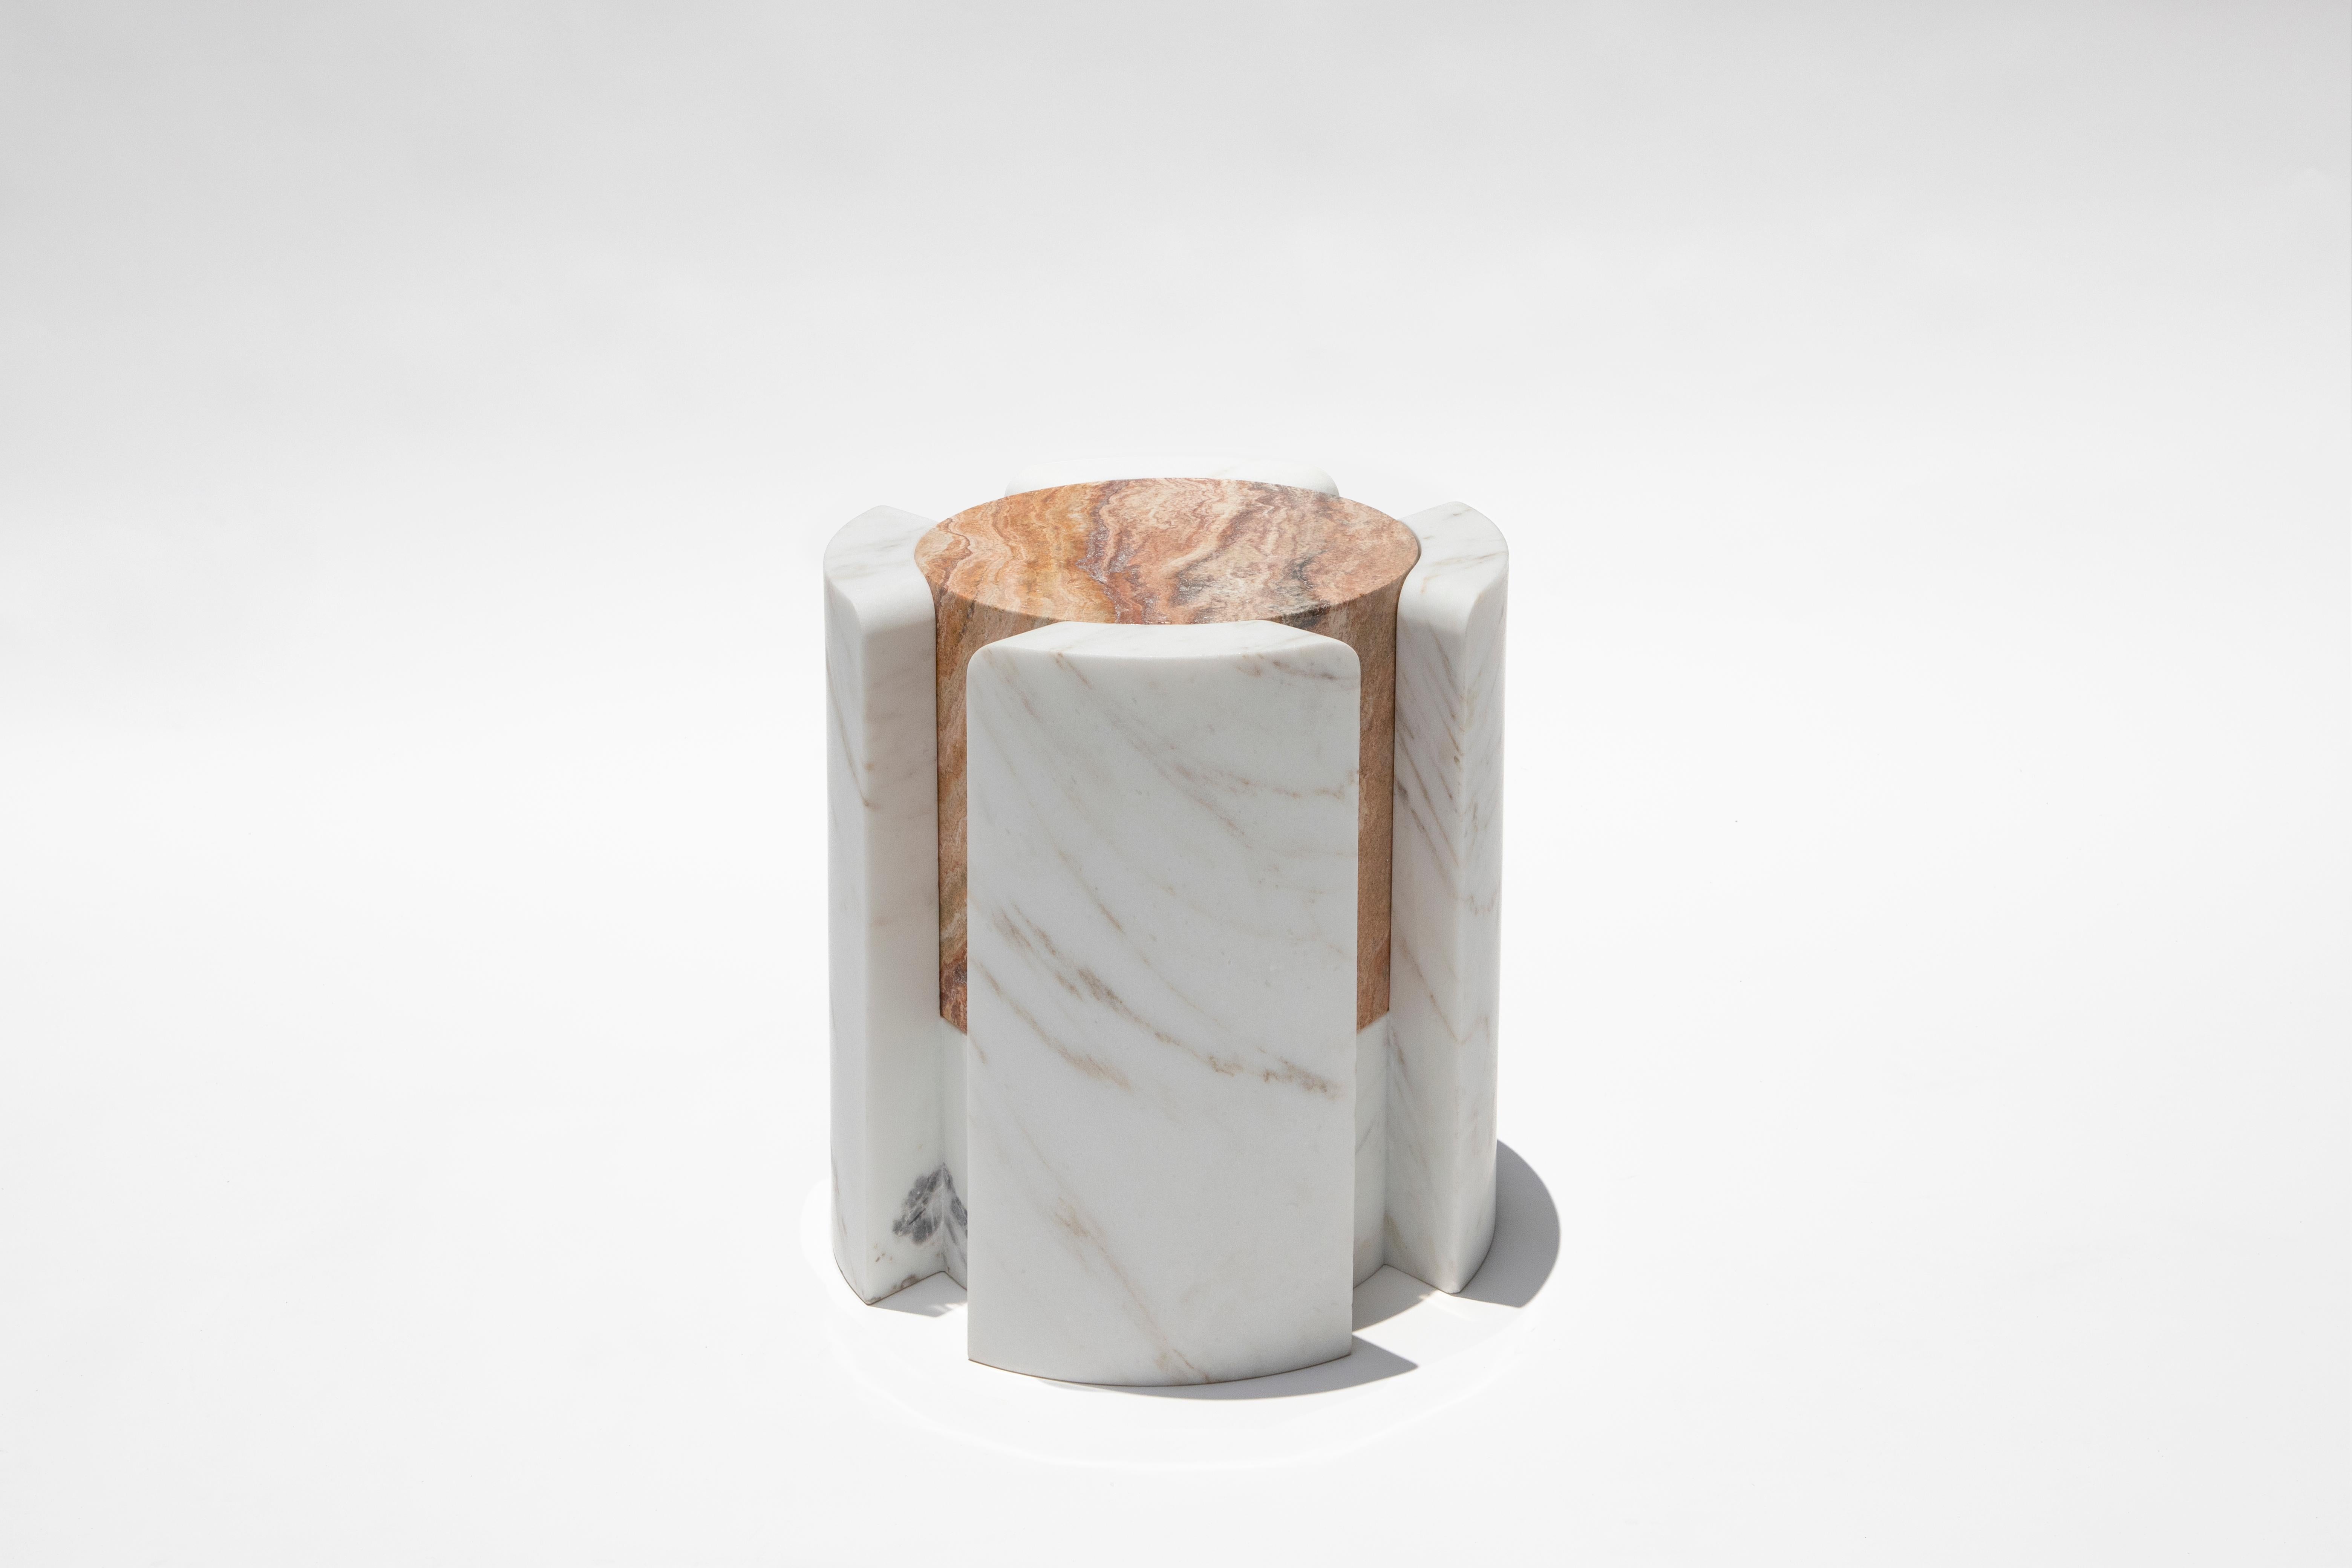 Organic Modern Volcanic Shade of Marble III Stool/Table by Sten Studio, REP by Tuleste Factory